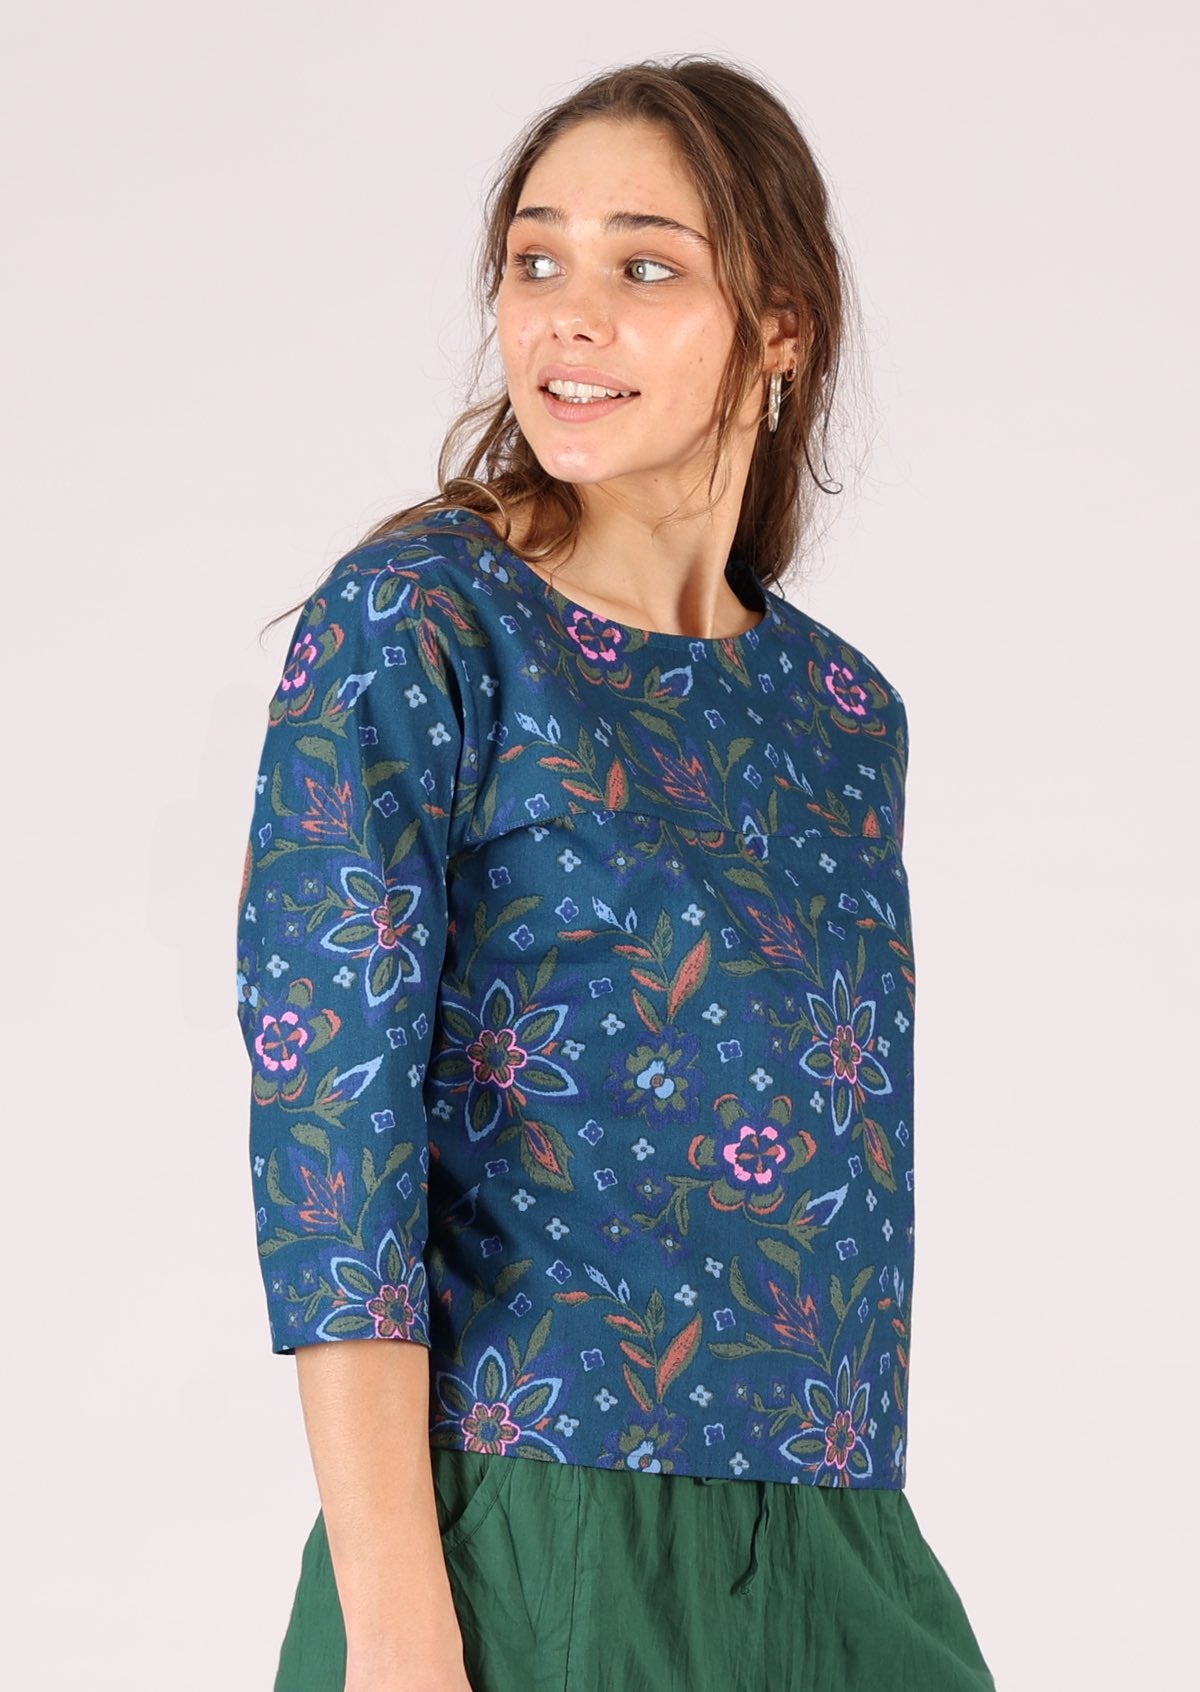 Model wears 3/4 sleeve cotton top with a floral print. 